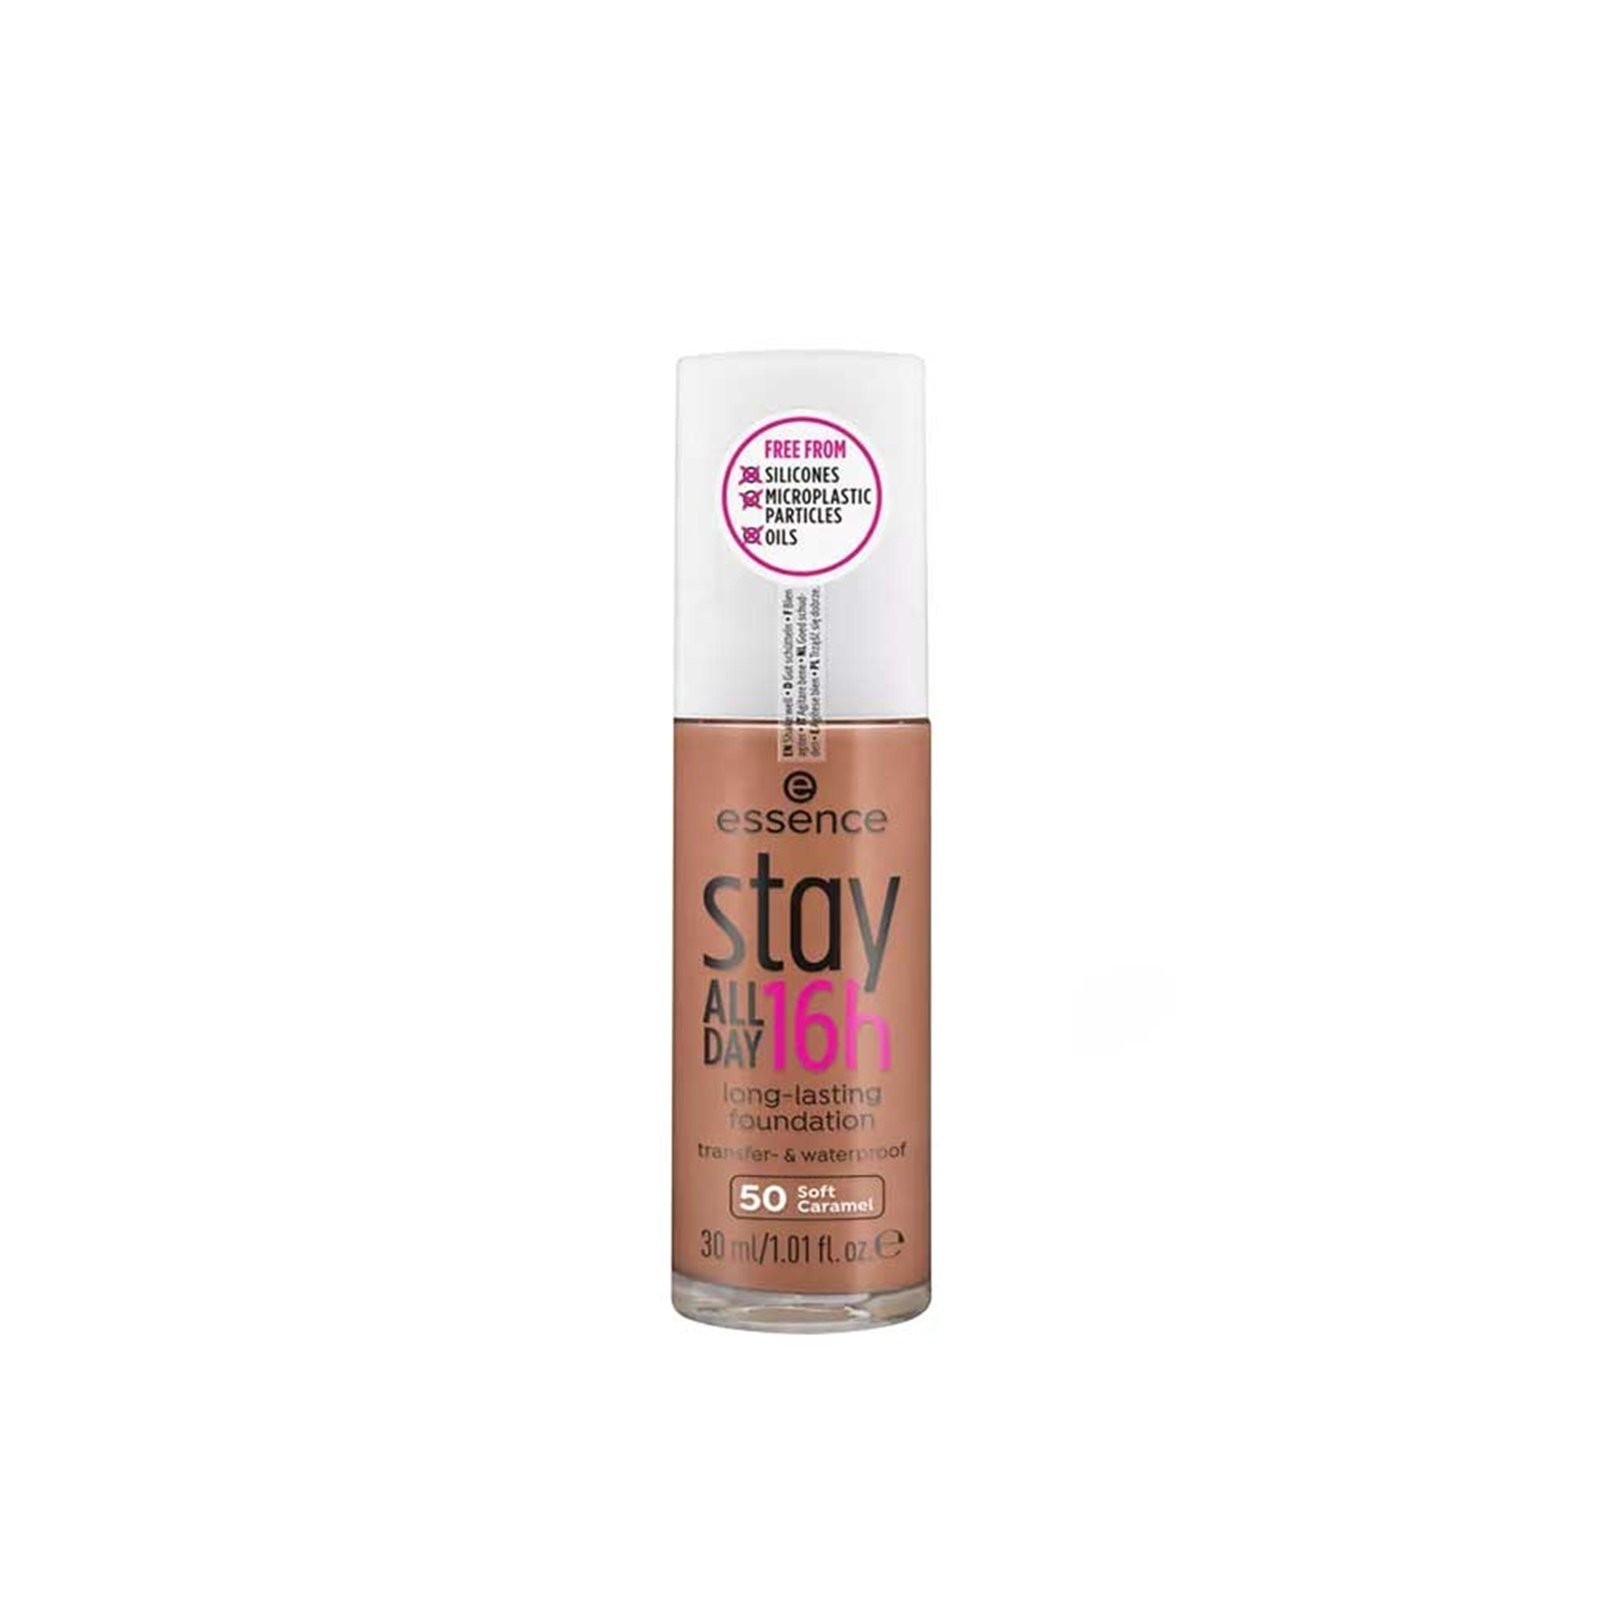 essence Stay All Day 16h Long-Lasting Foundation